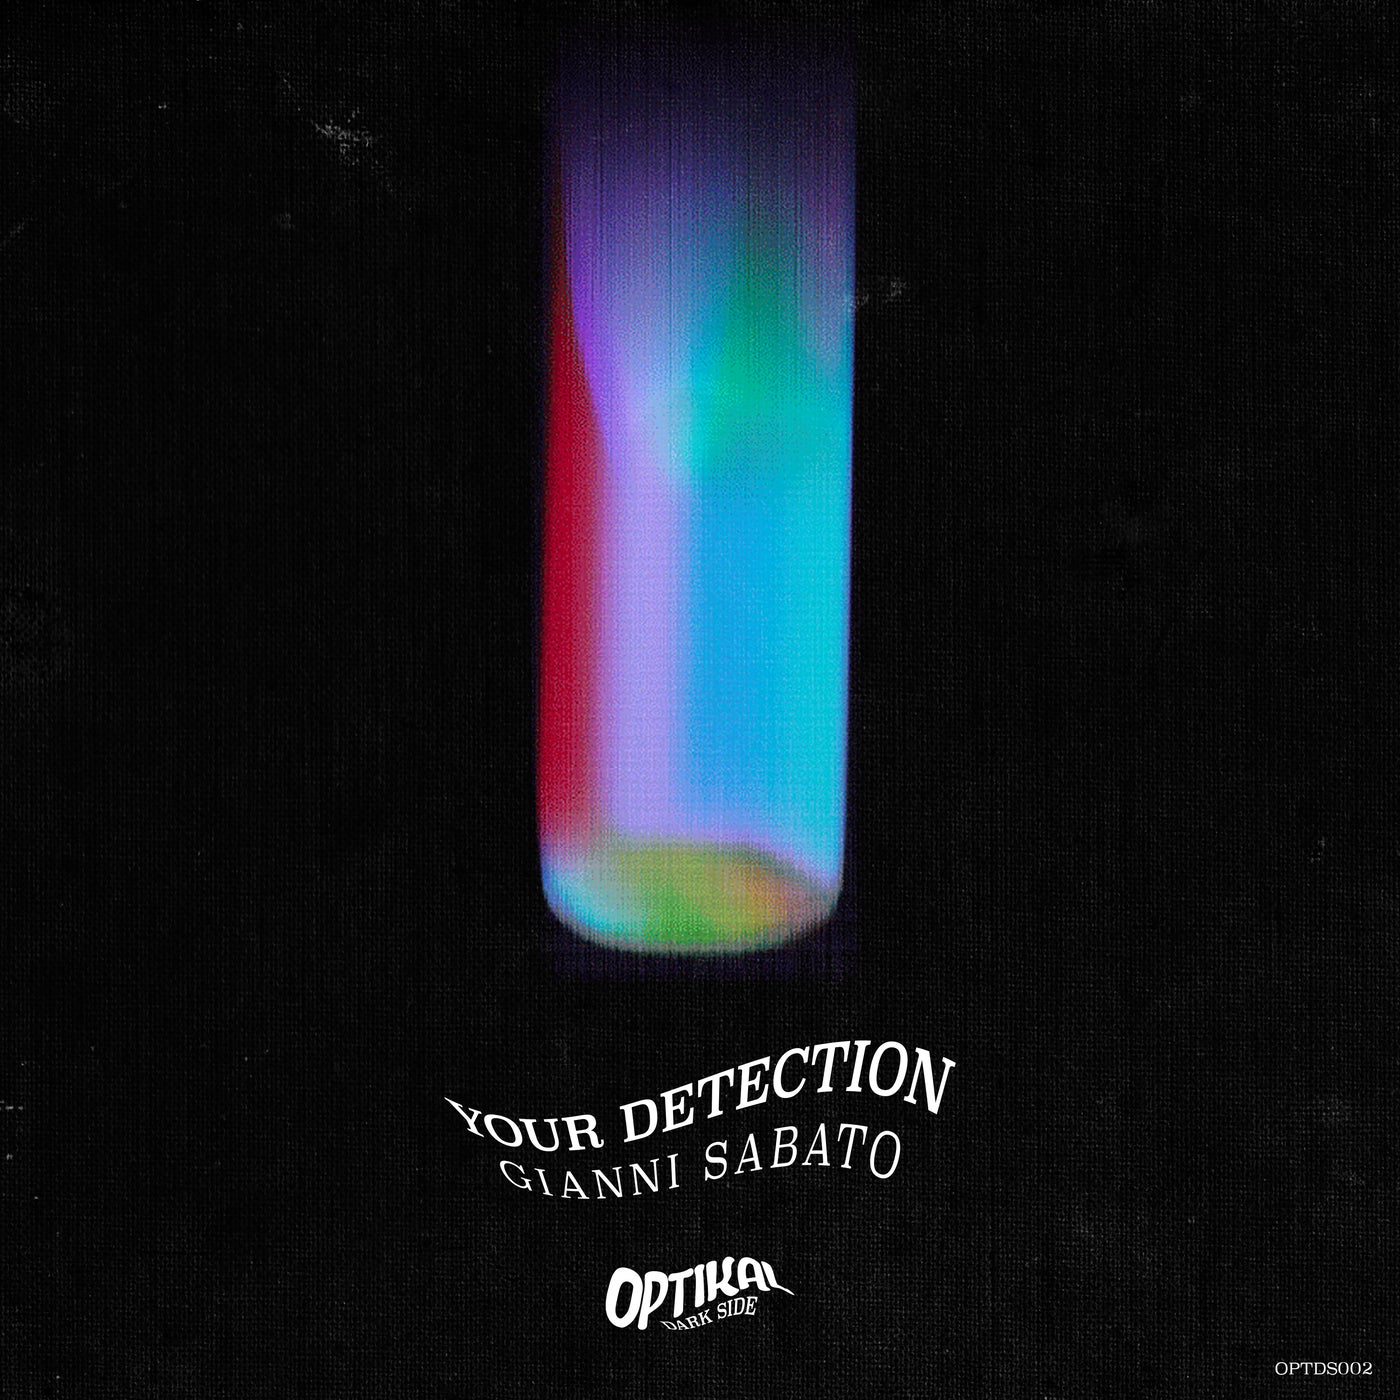 Your detection